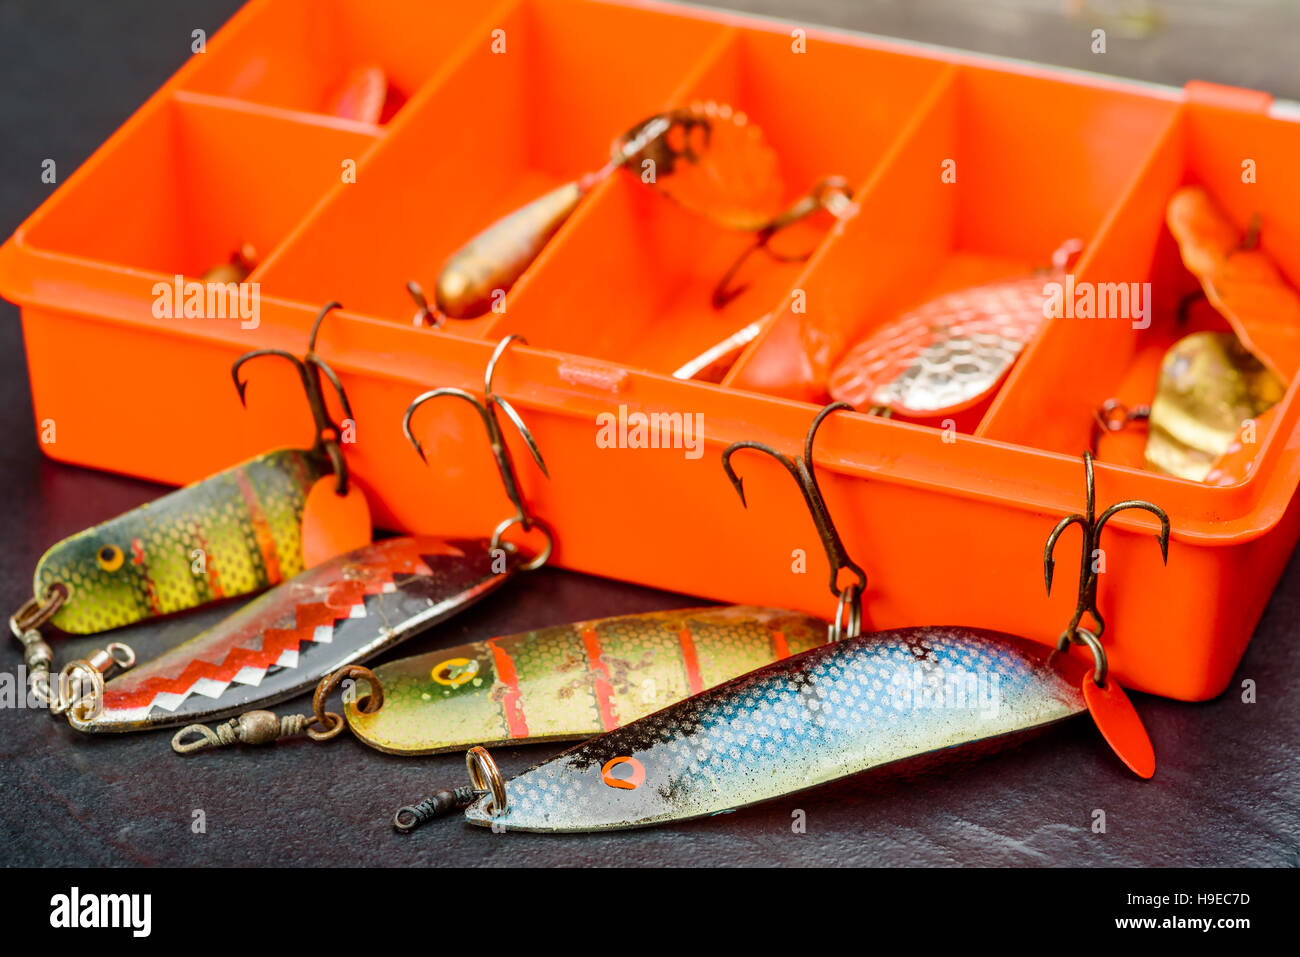 Vintage Fishing Gear Stock Photo, Picture and Royalty Free Image. Image  51268005.